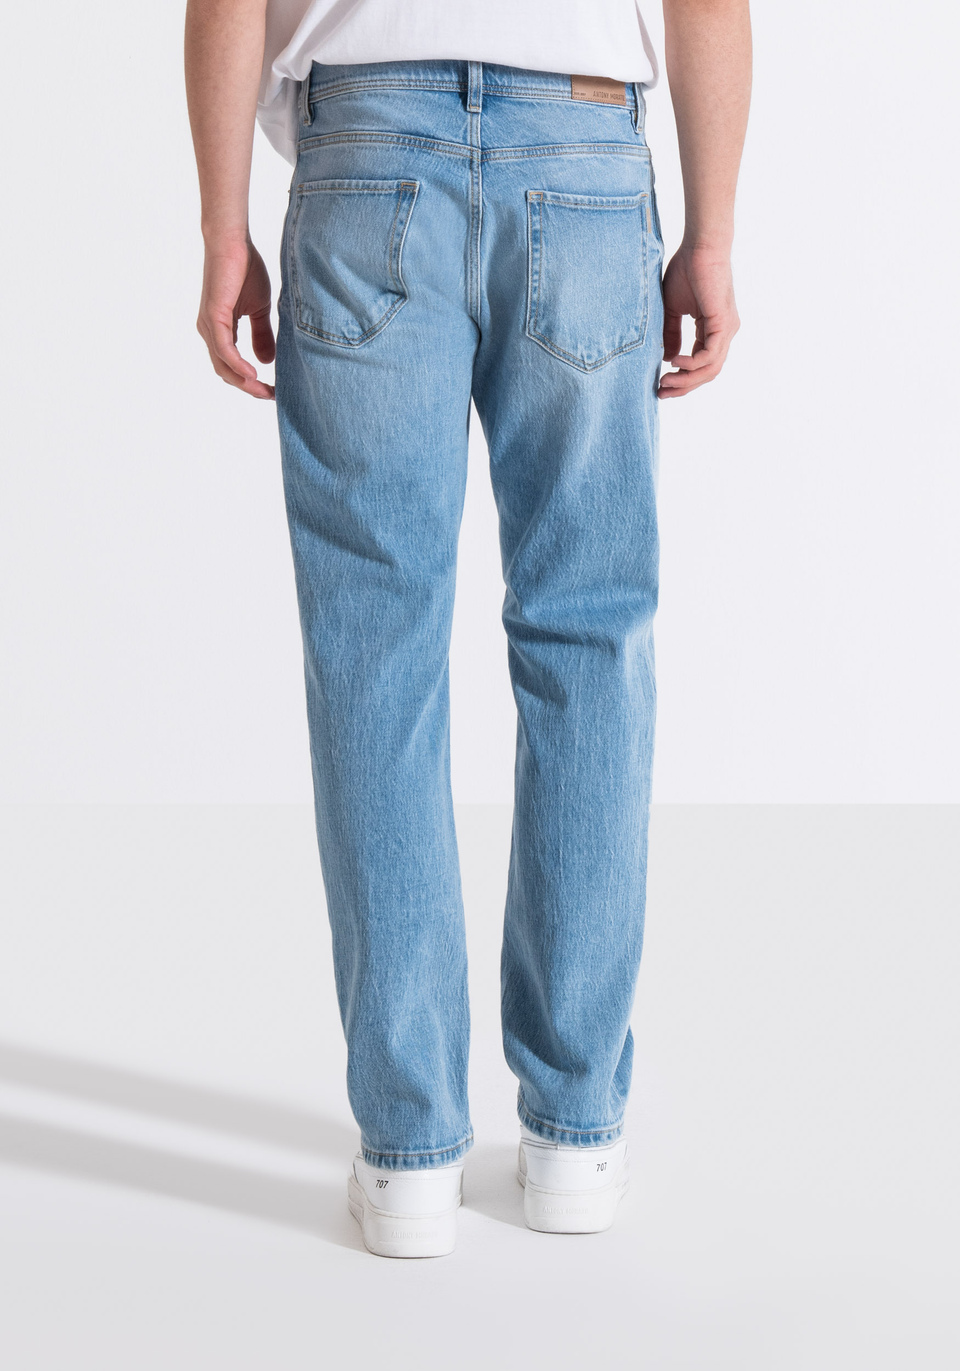 "JOE" REGULAR STRAIGHT FIT JEANS IN COMFORT DENIM WITH VISIBLE STITCHING - Antony Morato Online Shop